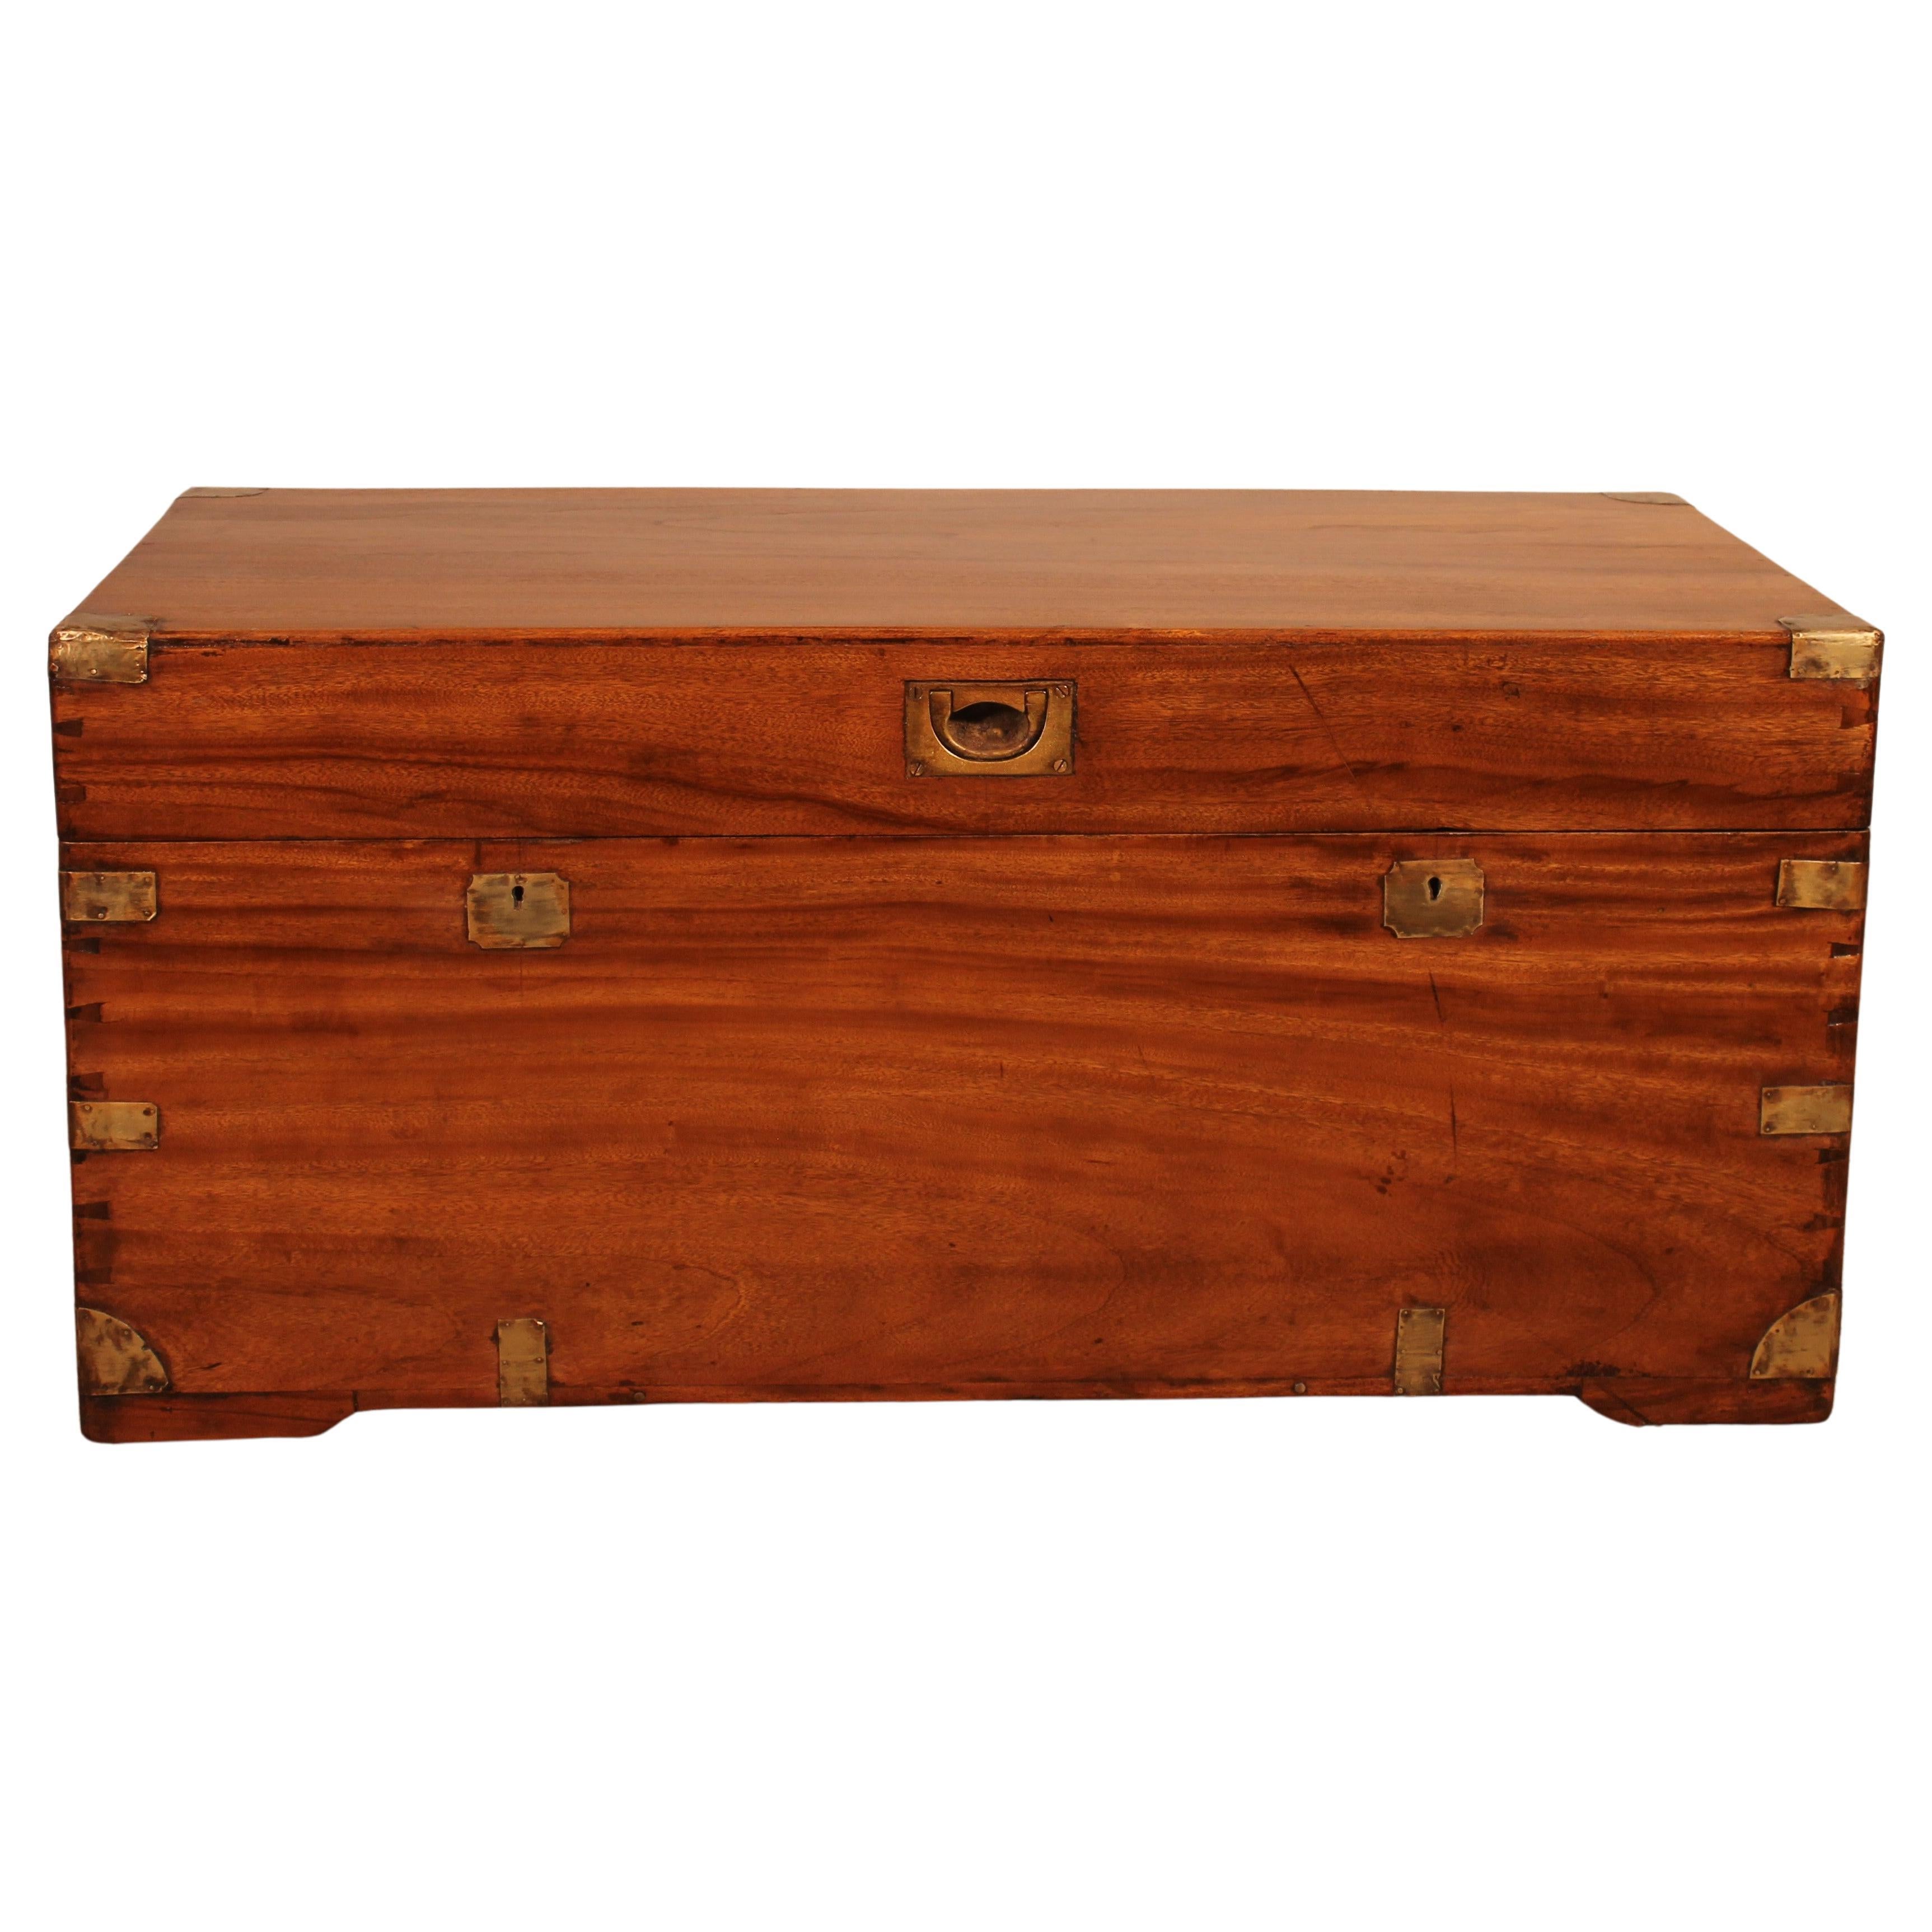 Large Campaign Chest In Camphor Wood From The 19th Century